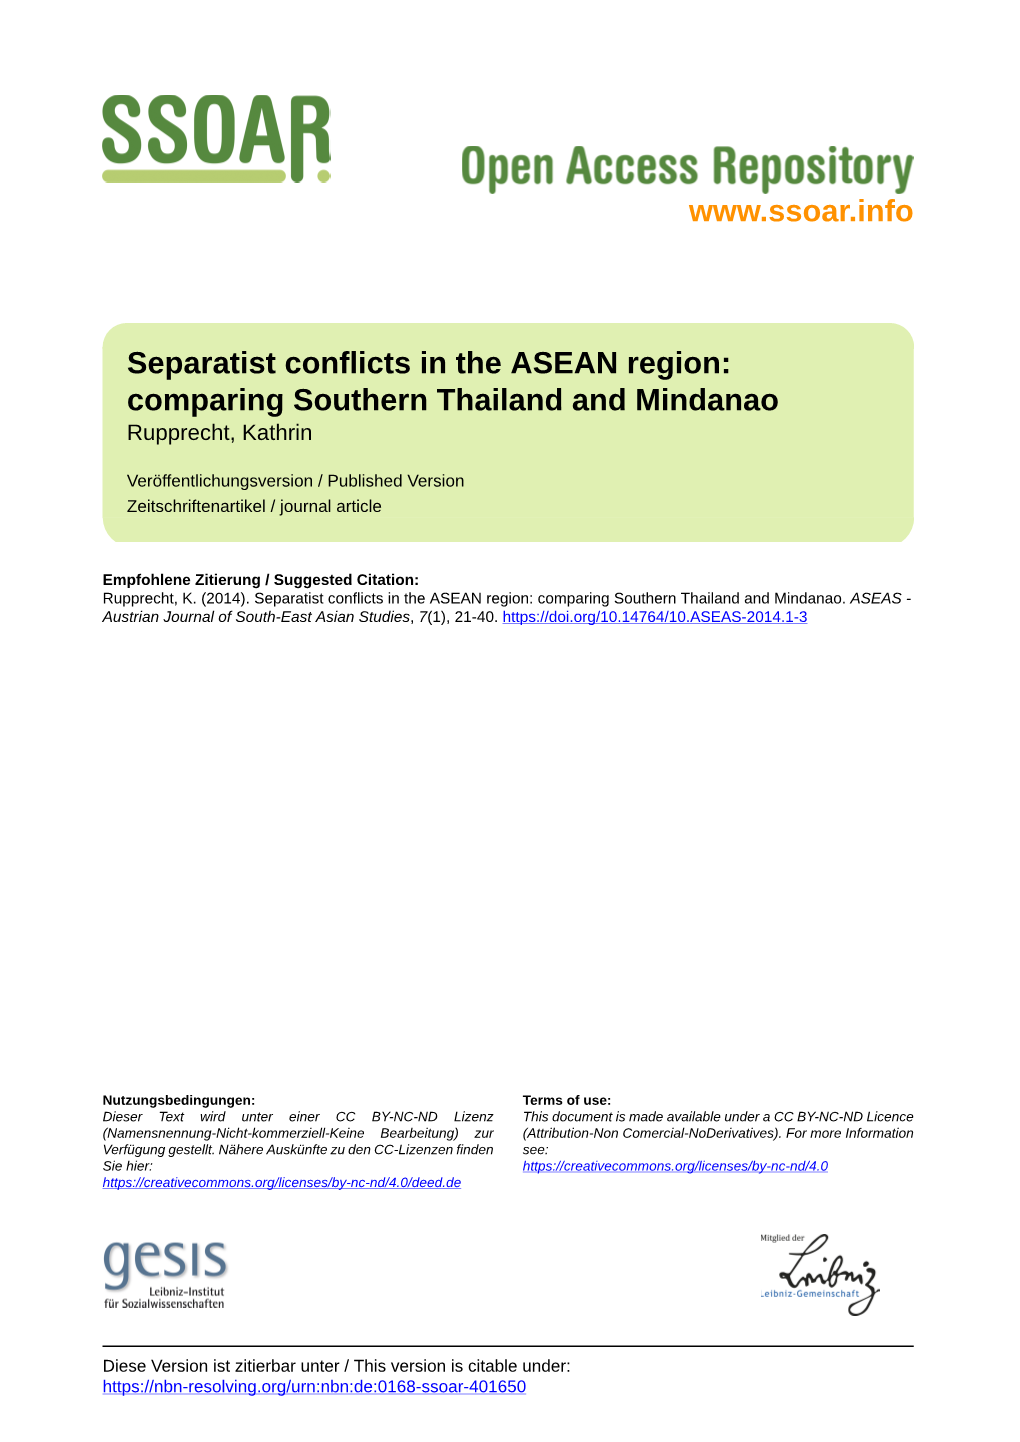 Separatist Conflicts in the ASEAN Region: Comparing